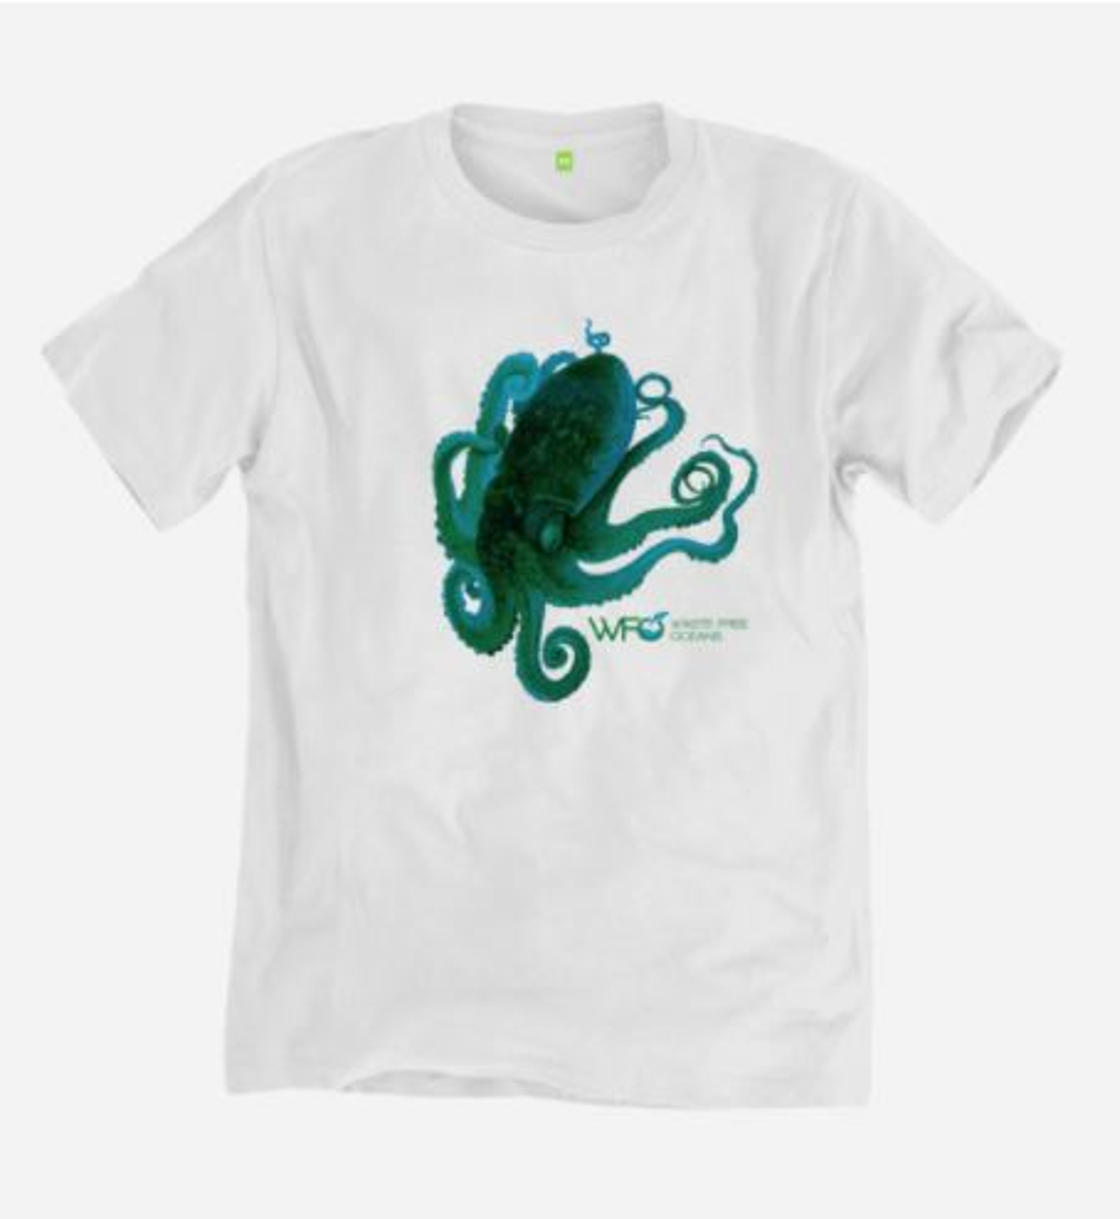 Waste Free Oceans Foundation launches online clothing store